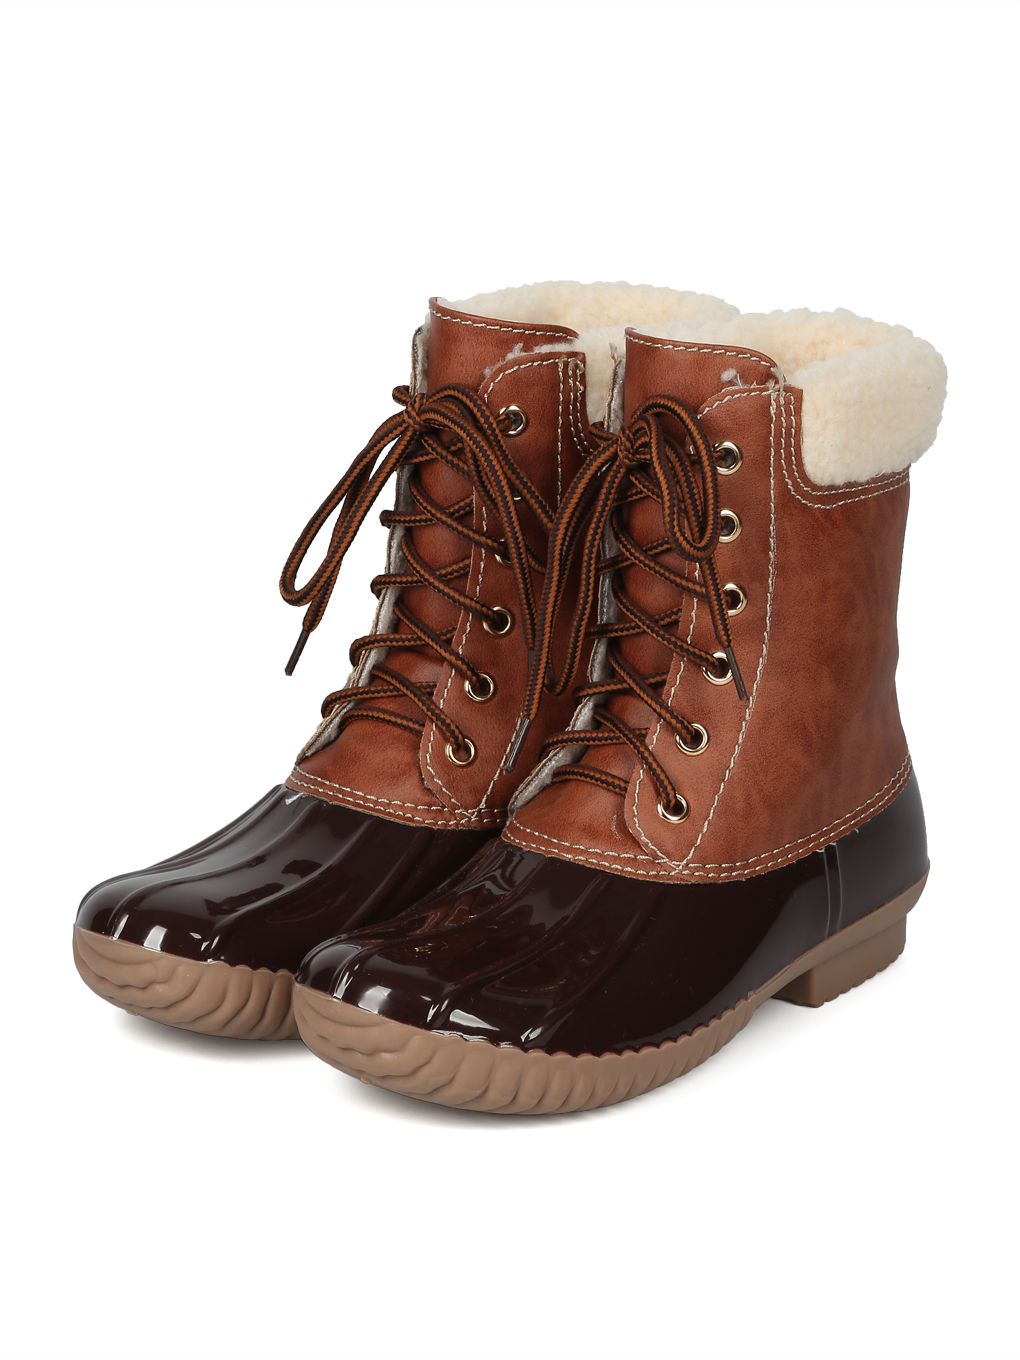 New Women Two Tone Faux Shearling Lined Lace Up Duck Boot - 17990 By Yoki - image 5 of 6